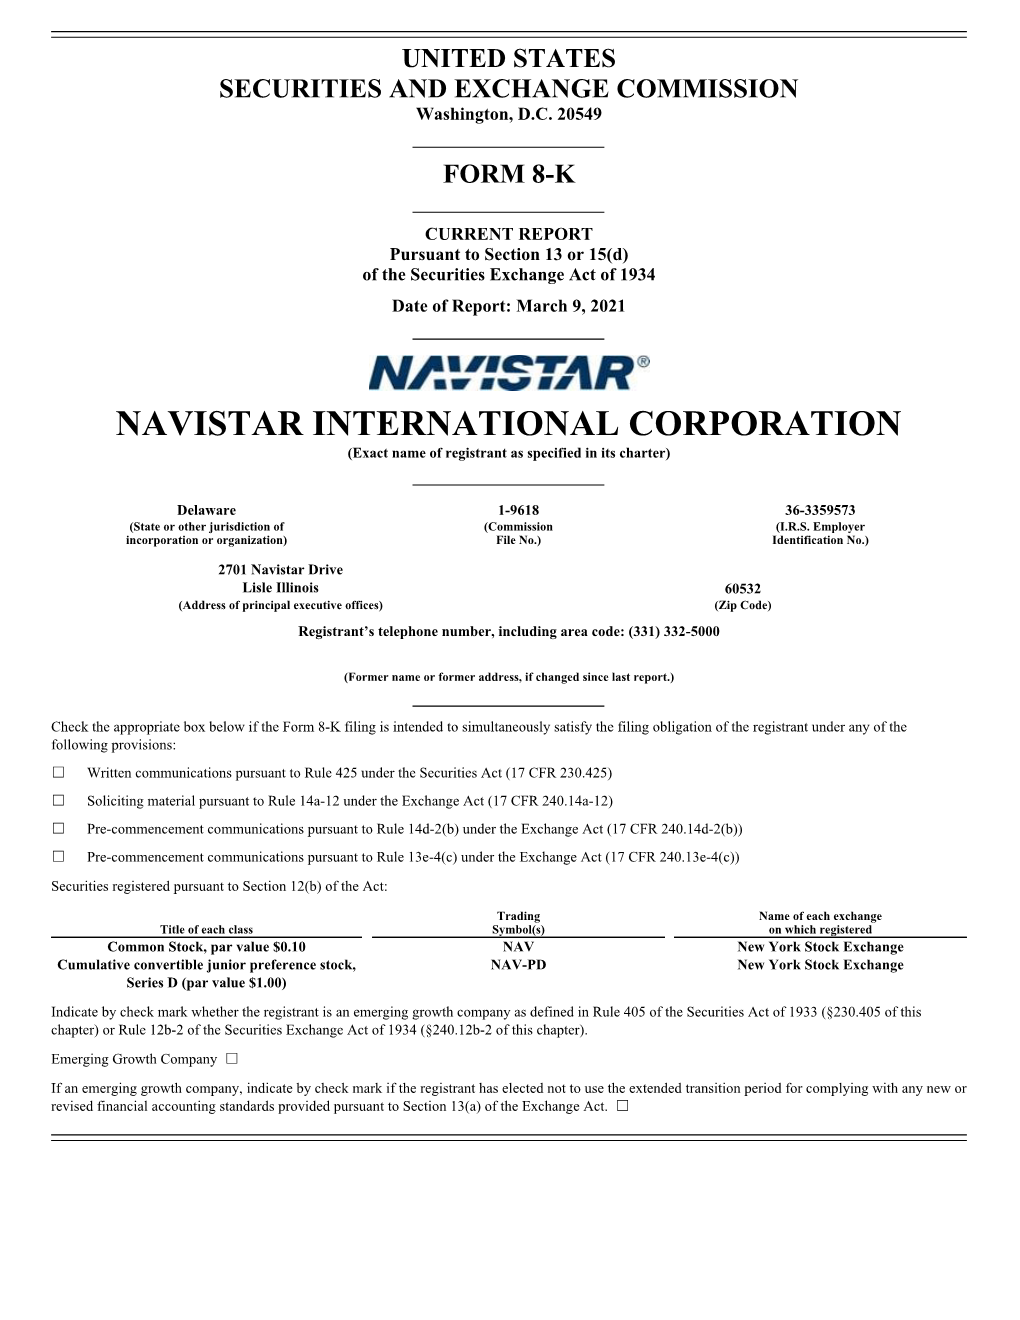 NAVISTAR INTERNATIONAL CORPORATION (Exact Name of Registrant As Specified in Its Charter)